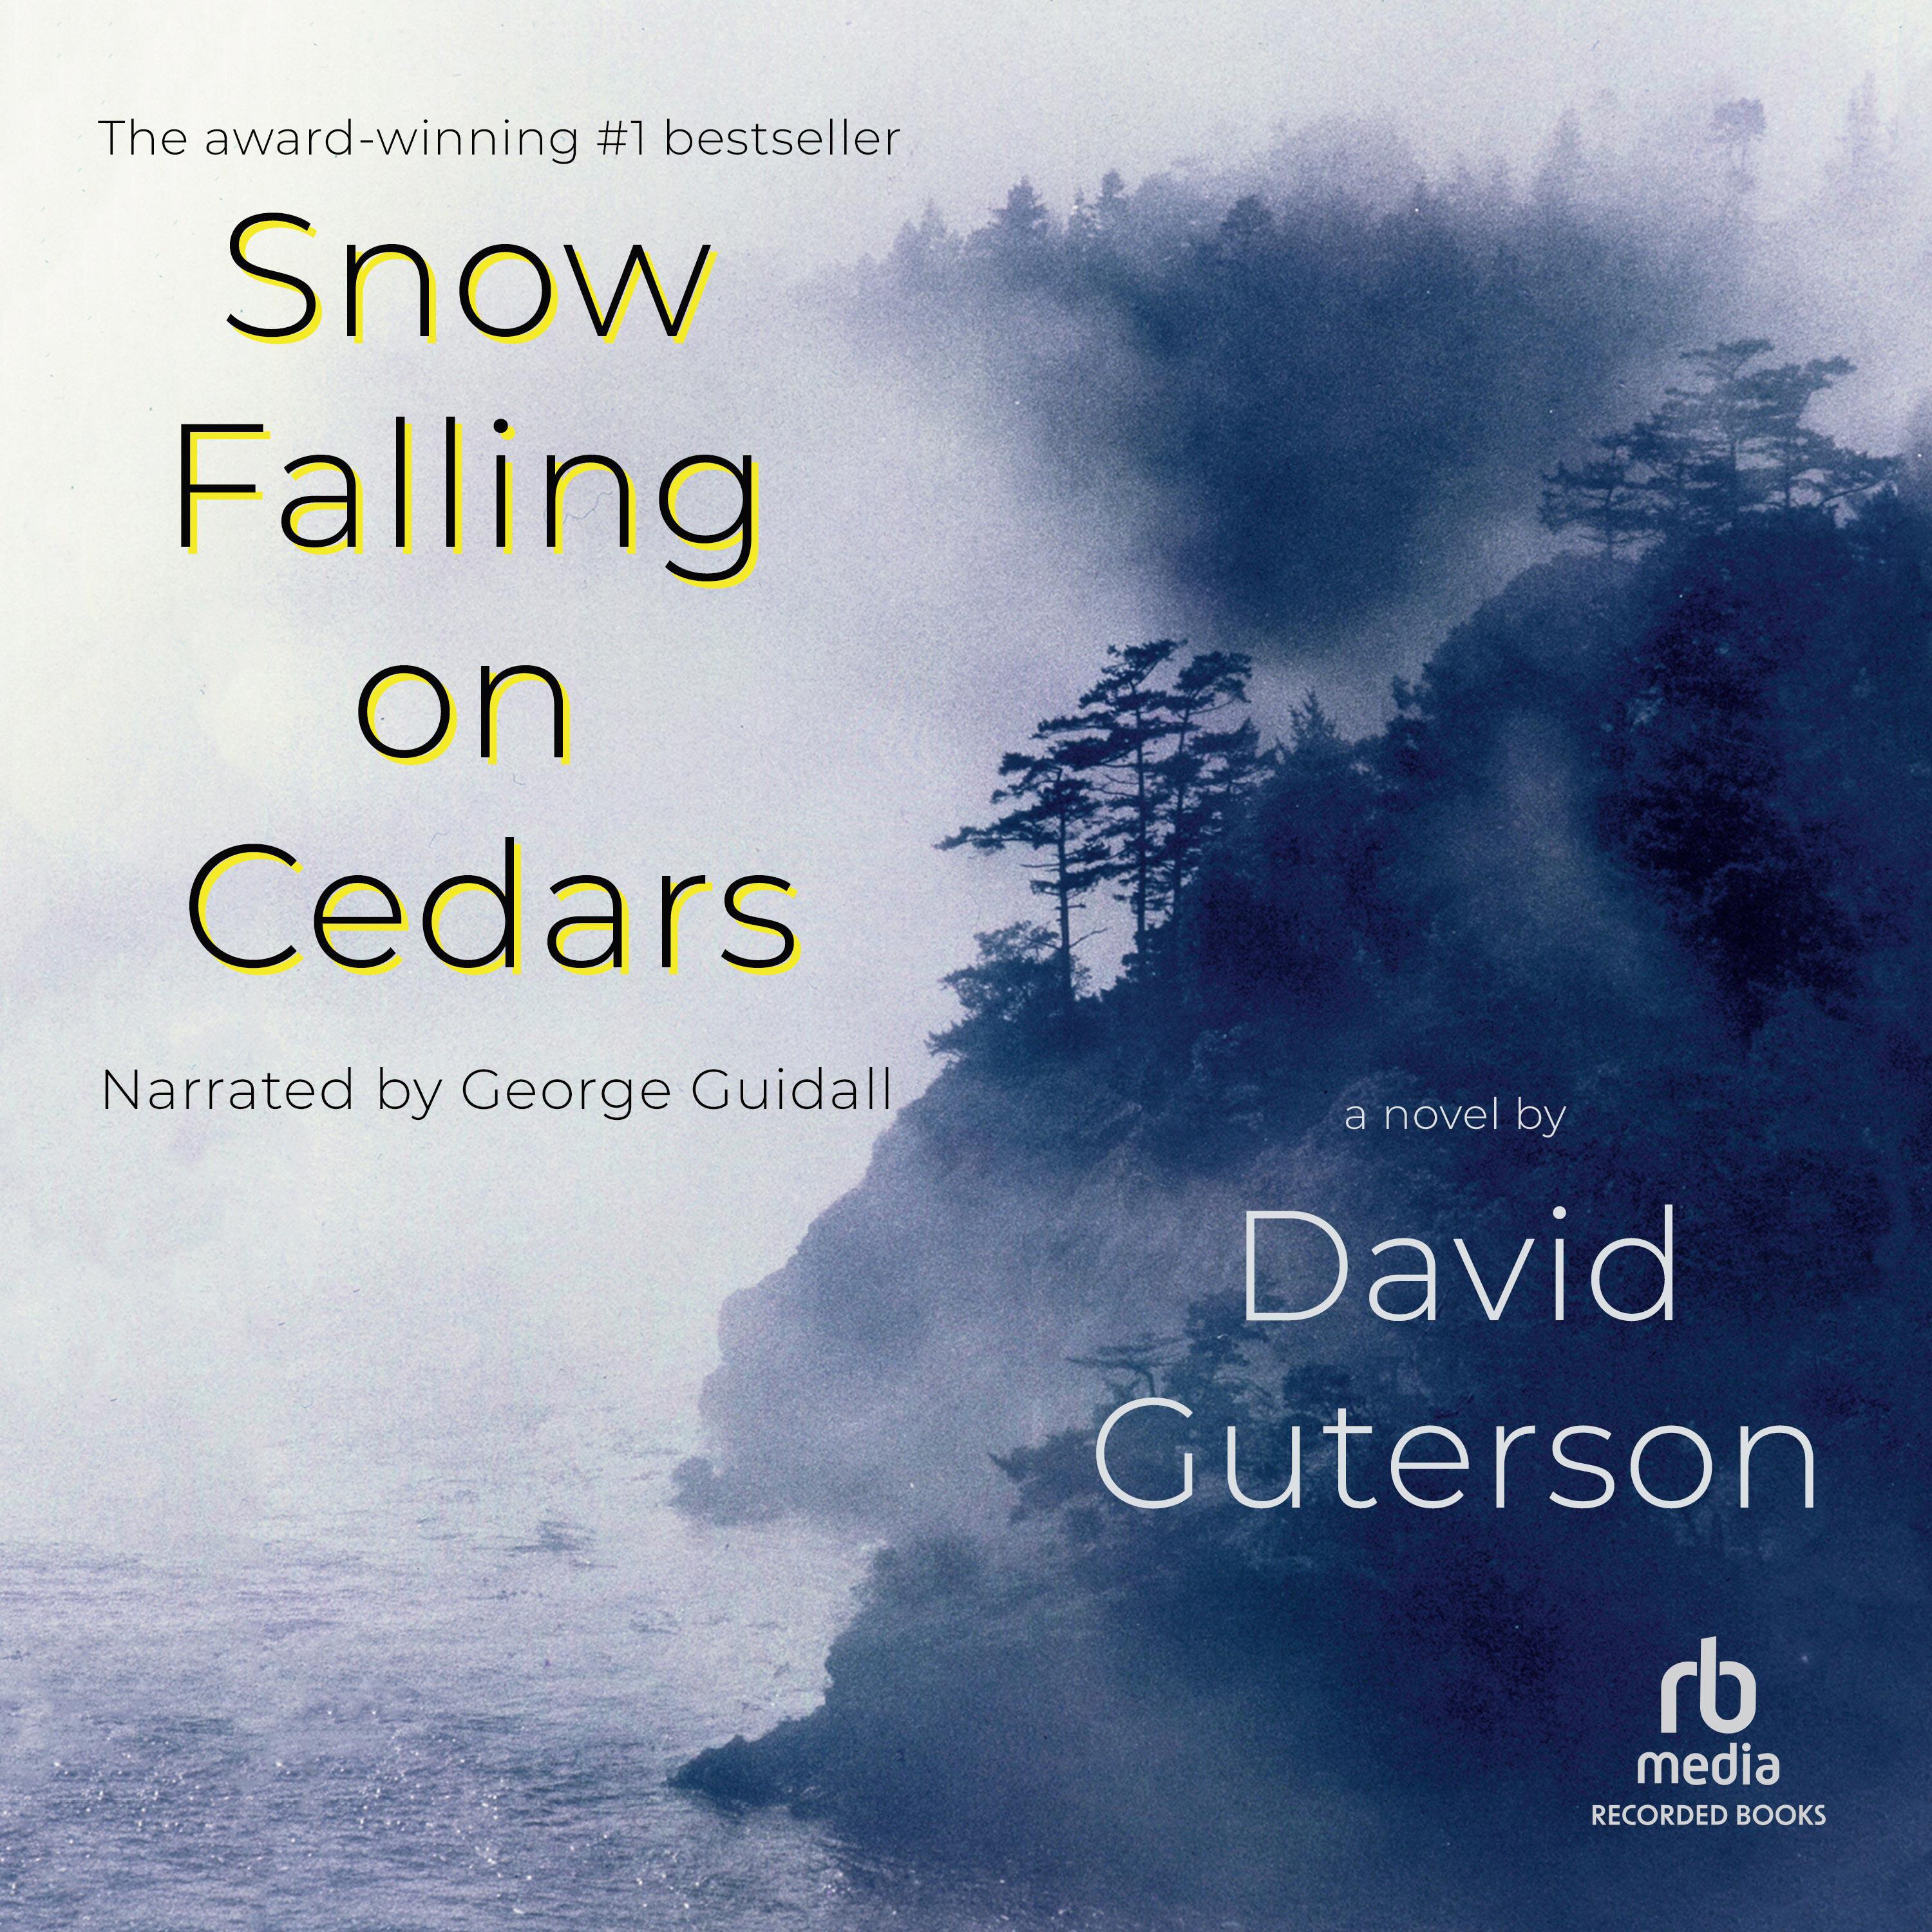 snow falling on cedars book review